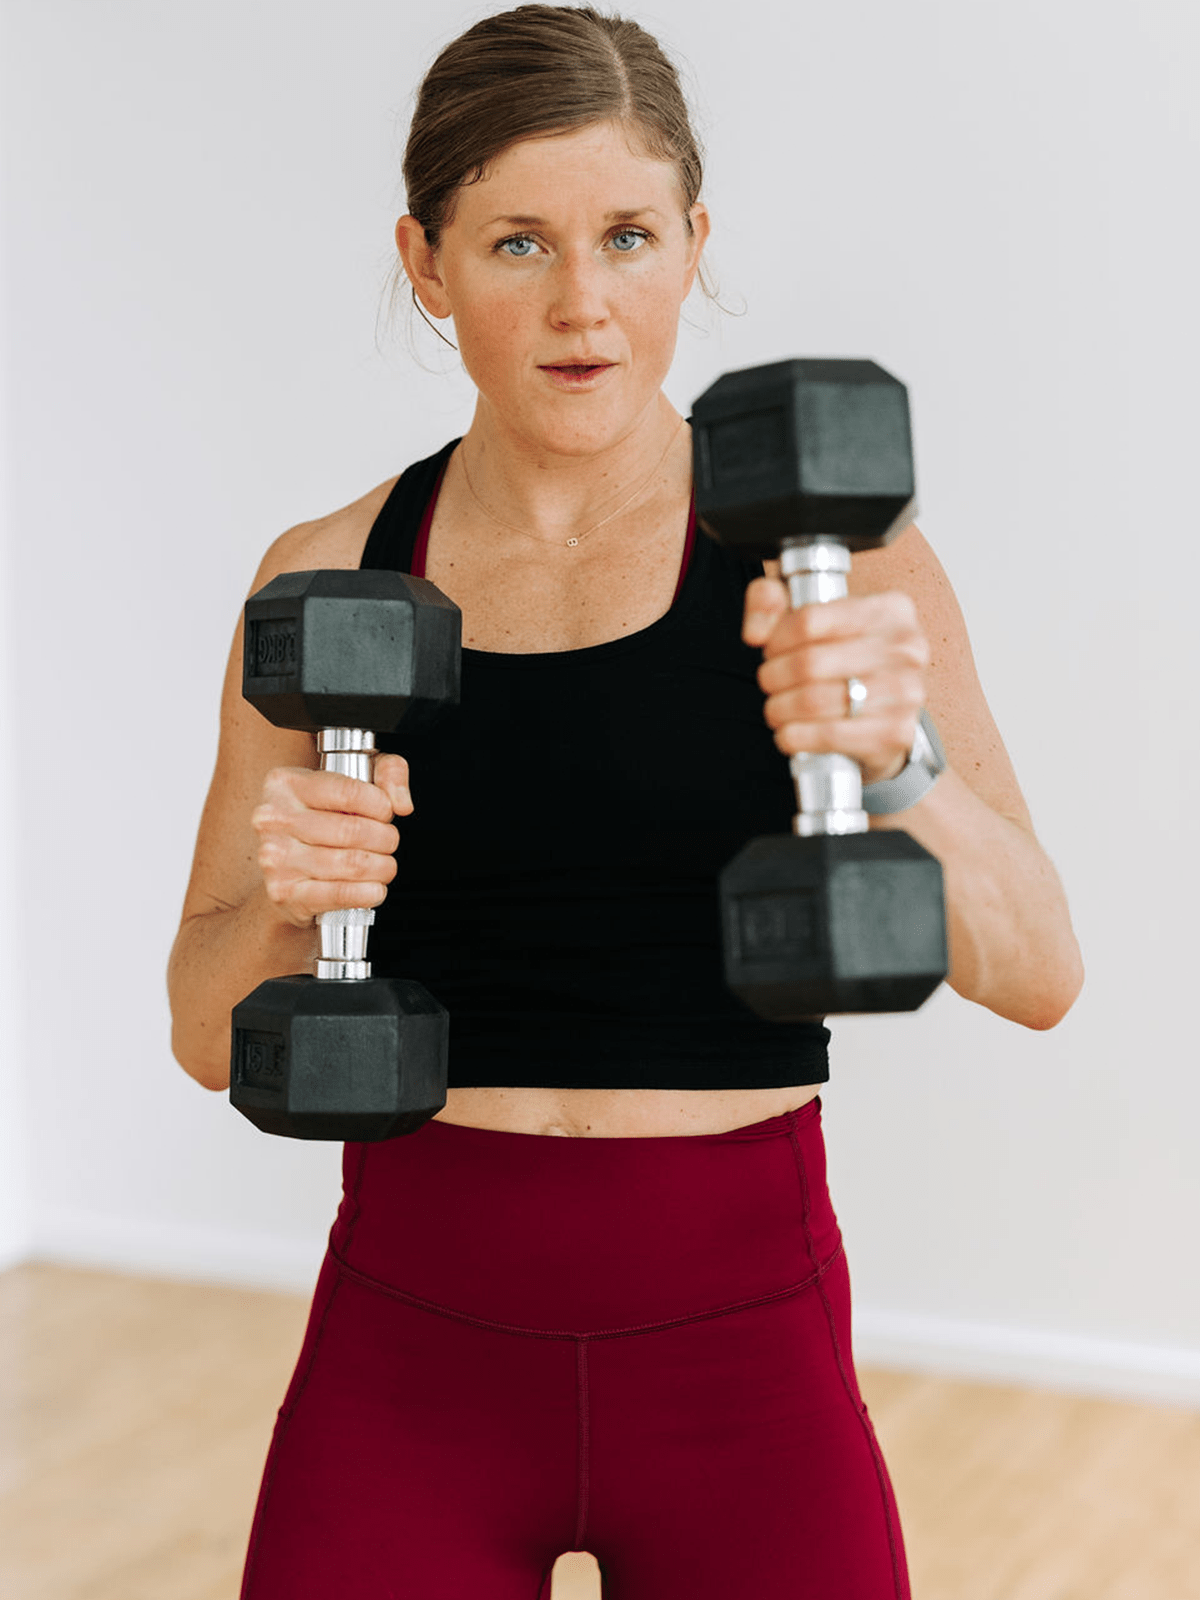 https://www.nourishmovelove.com/wp-content/uploads/2021/07/sculpted-arms-1.png